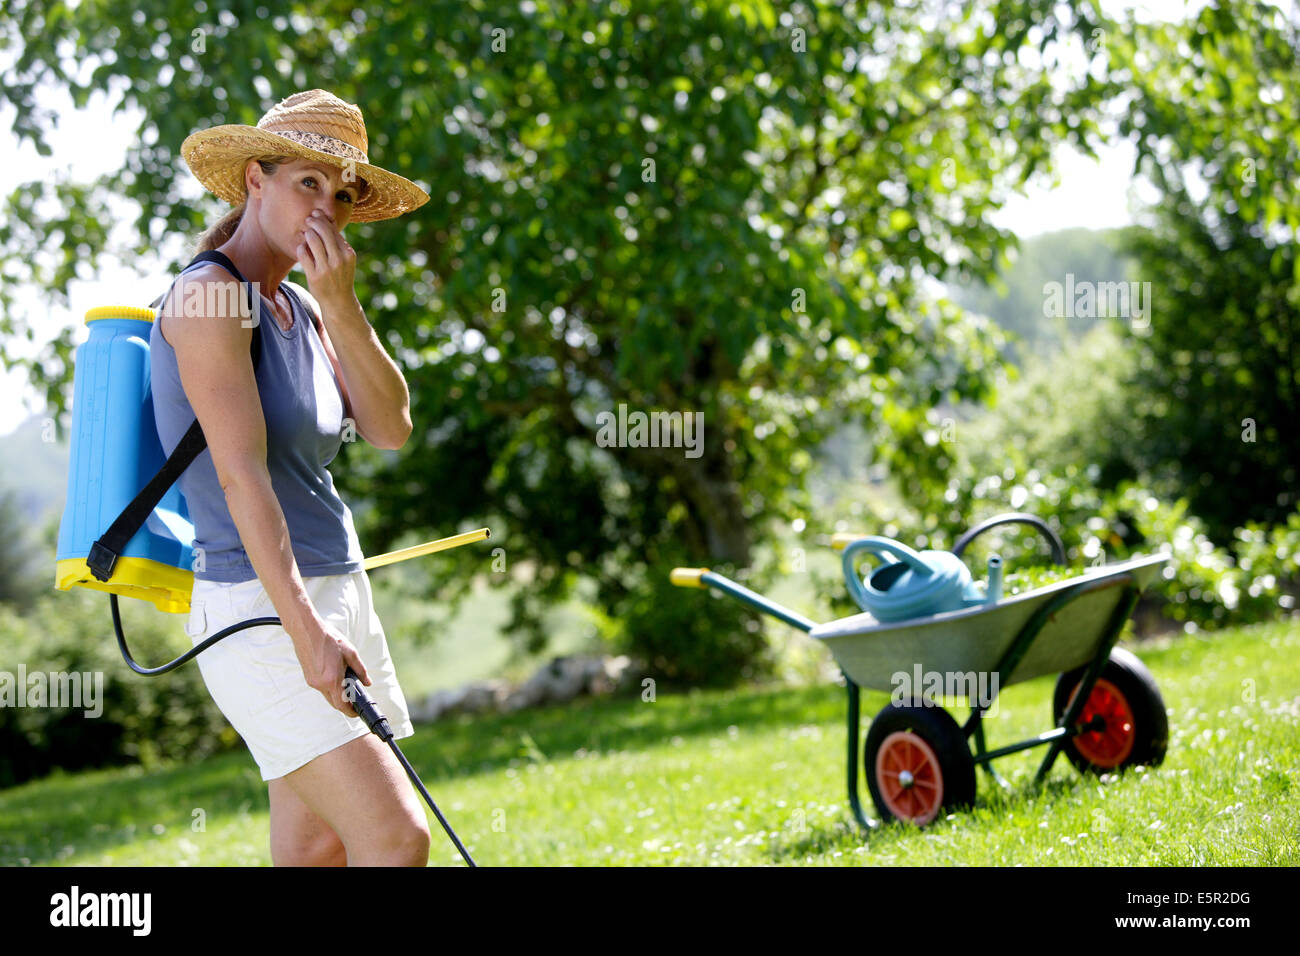 Woman spraying weed killer of pesticide in the garden. Stock Photo